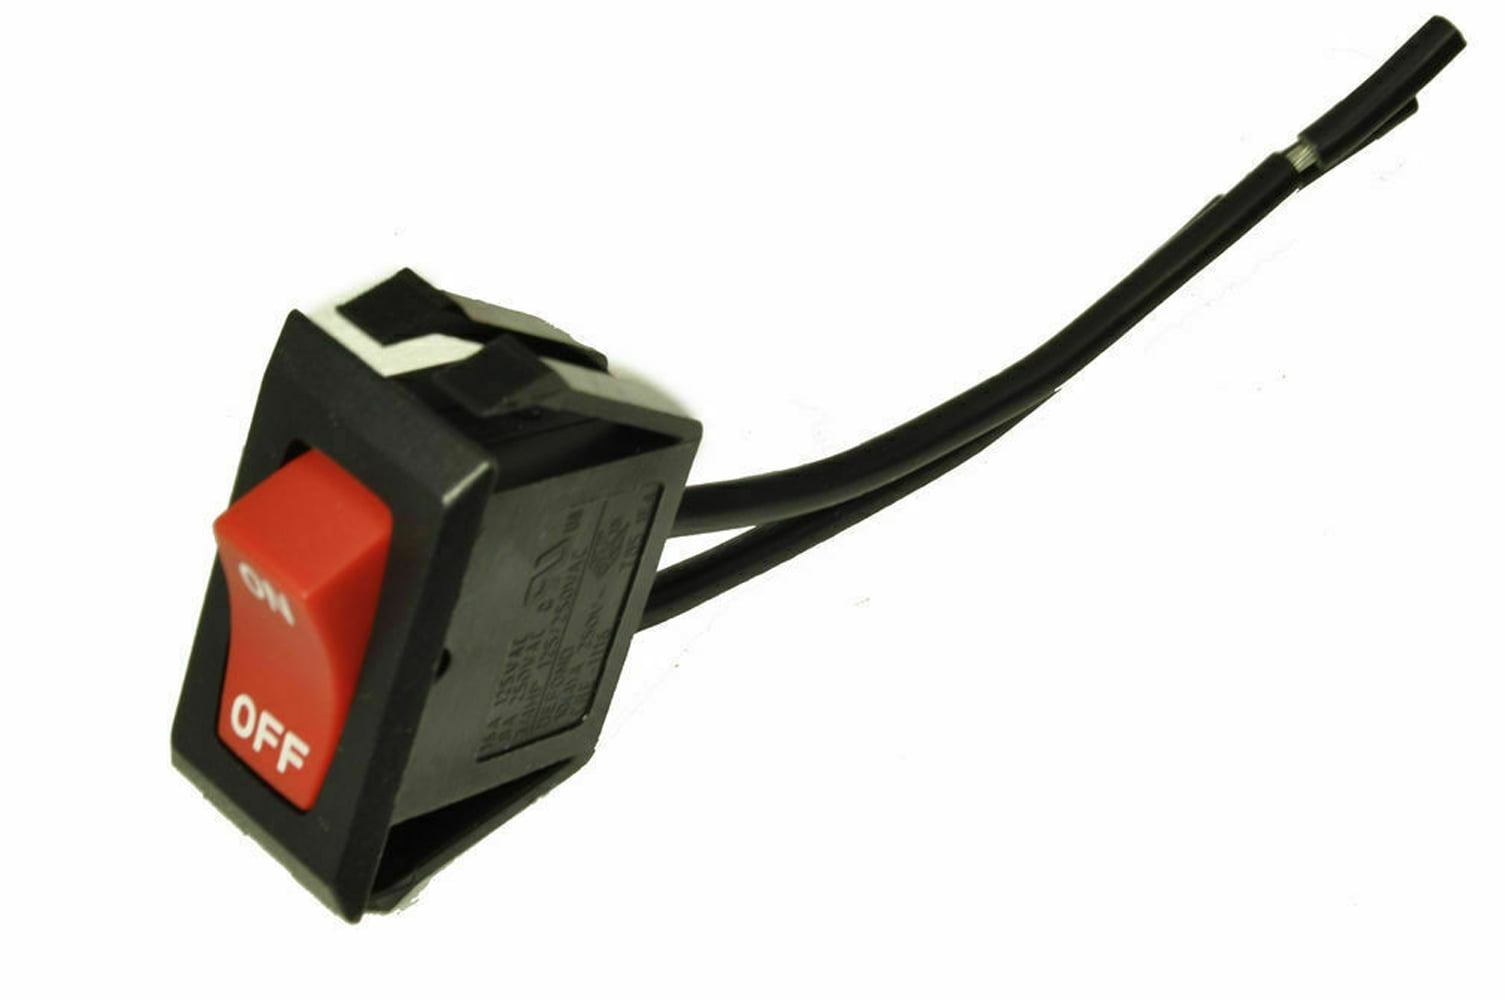 Replacement On/Off Rocker Power Switch designed for Hoover Wind Tunnel Upright 